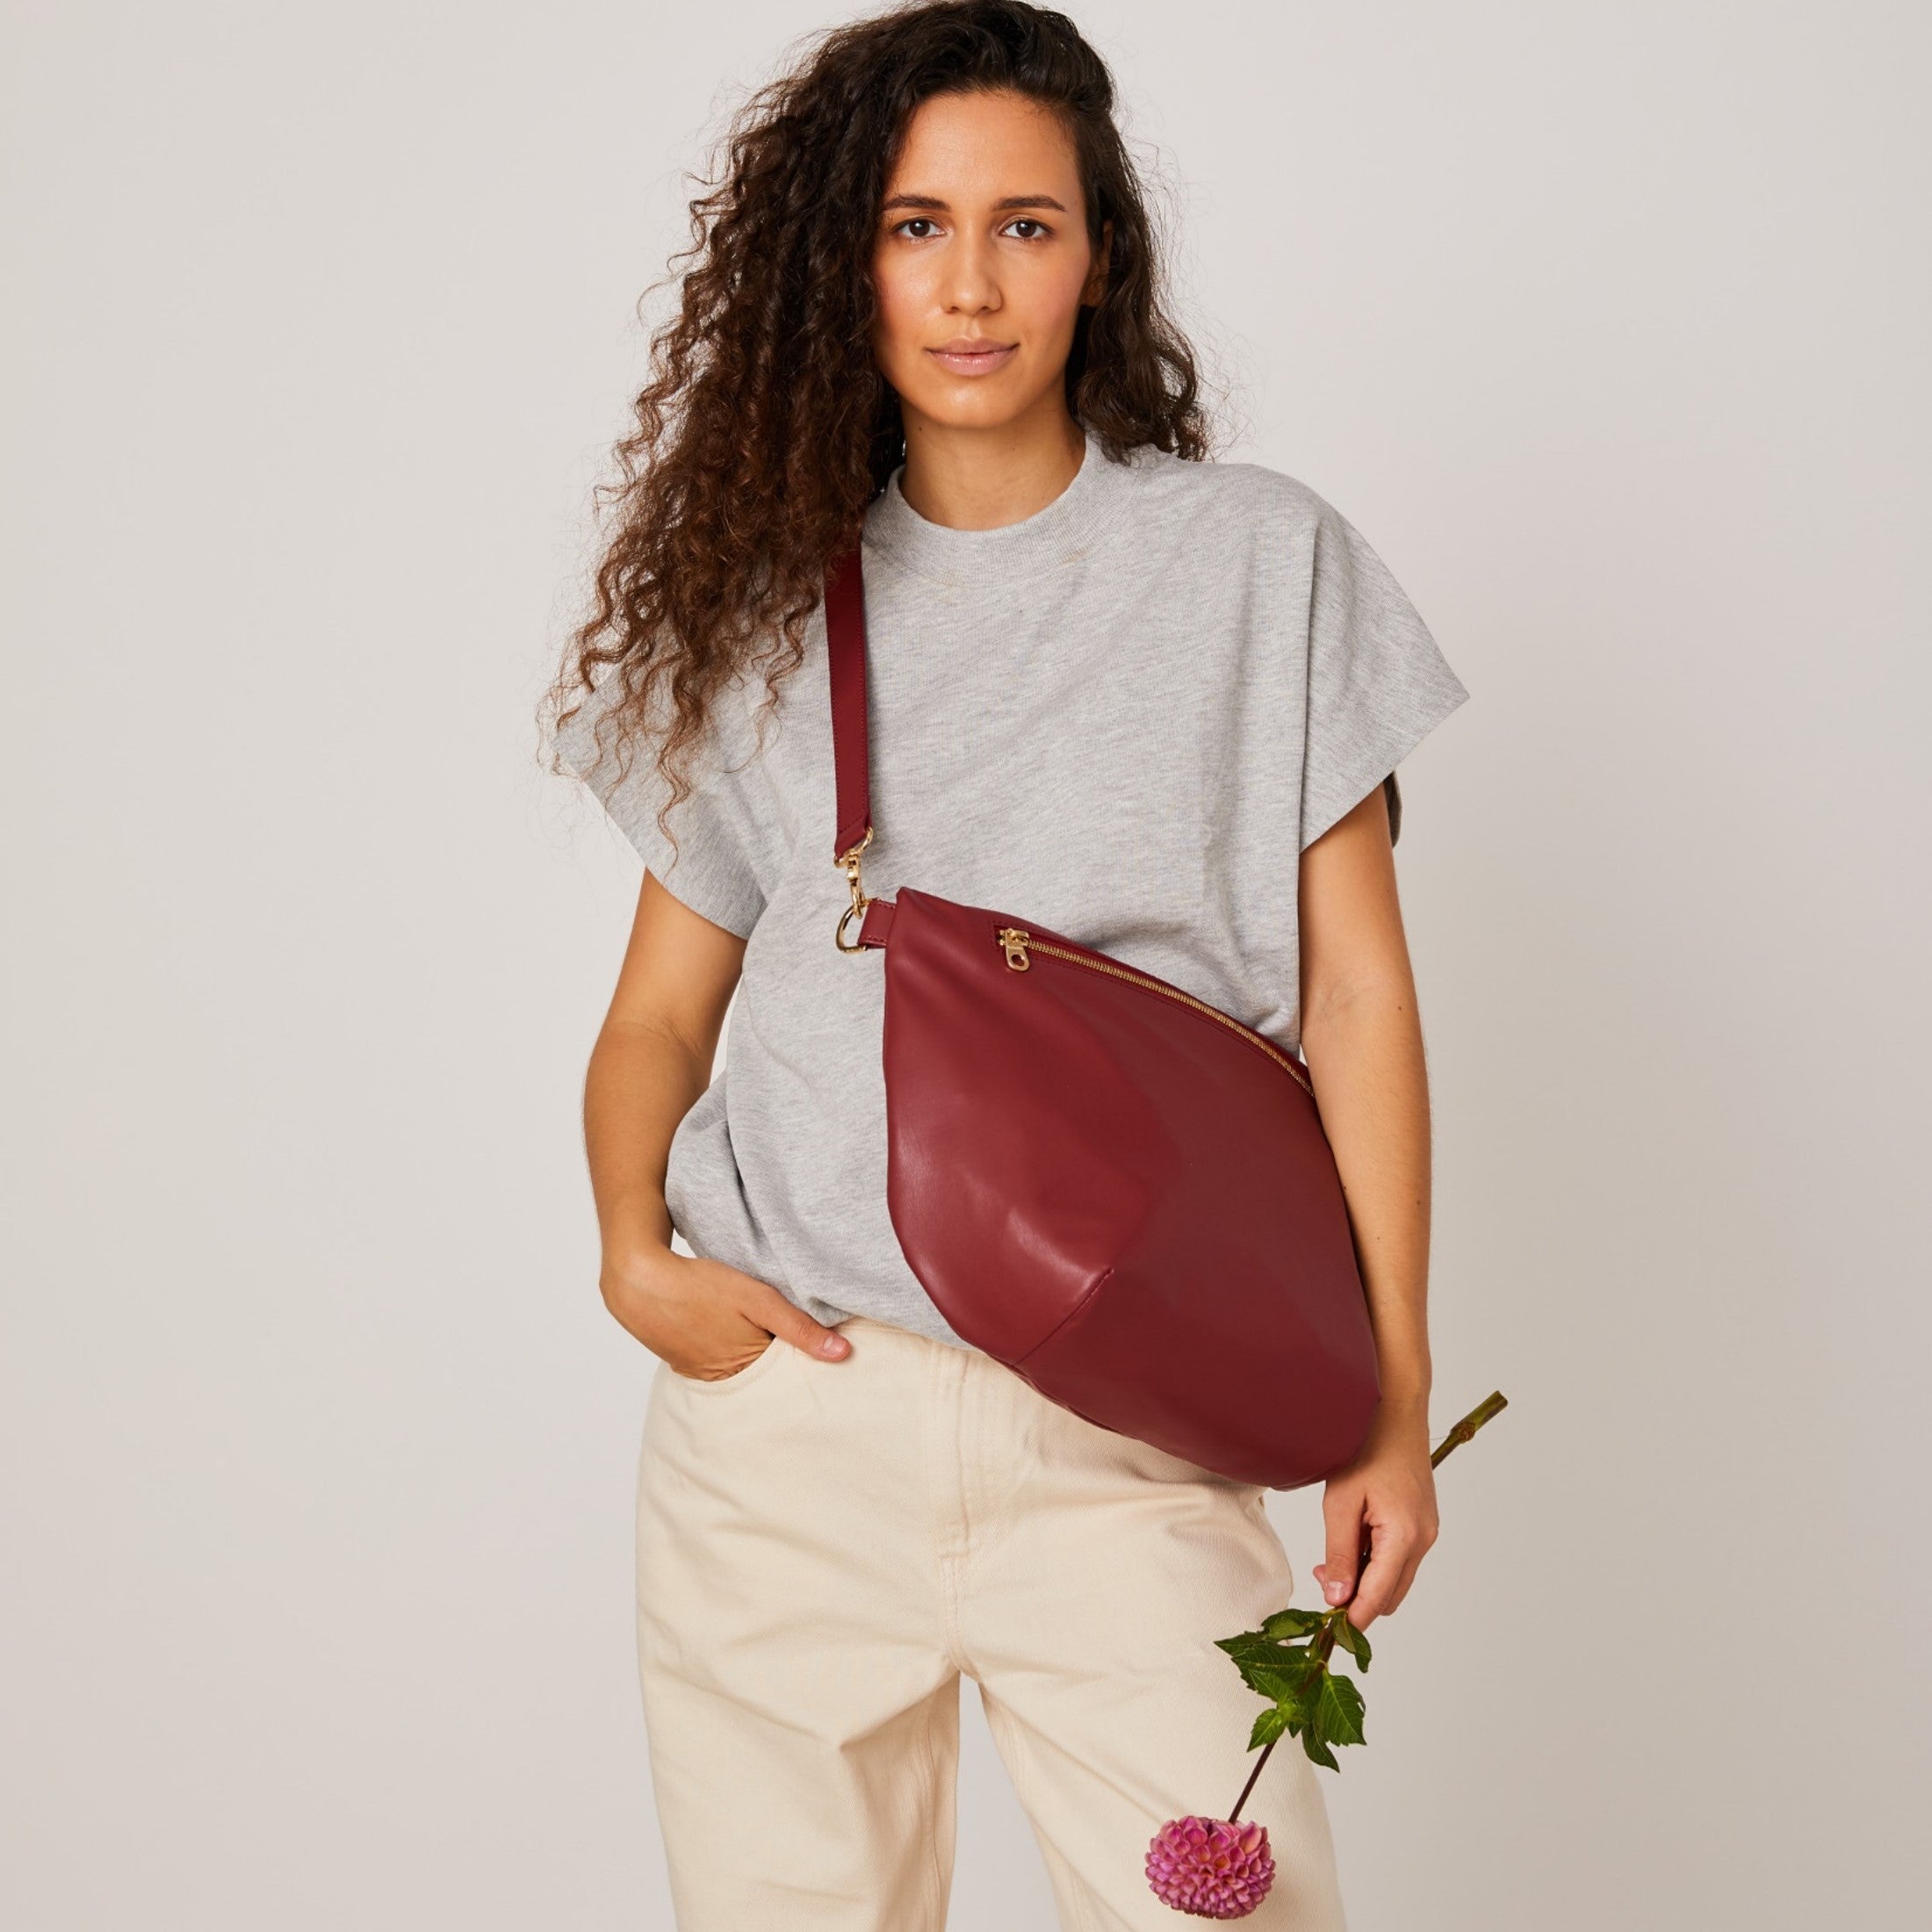 vegan crossbody bag made from apples in wine color